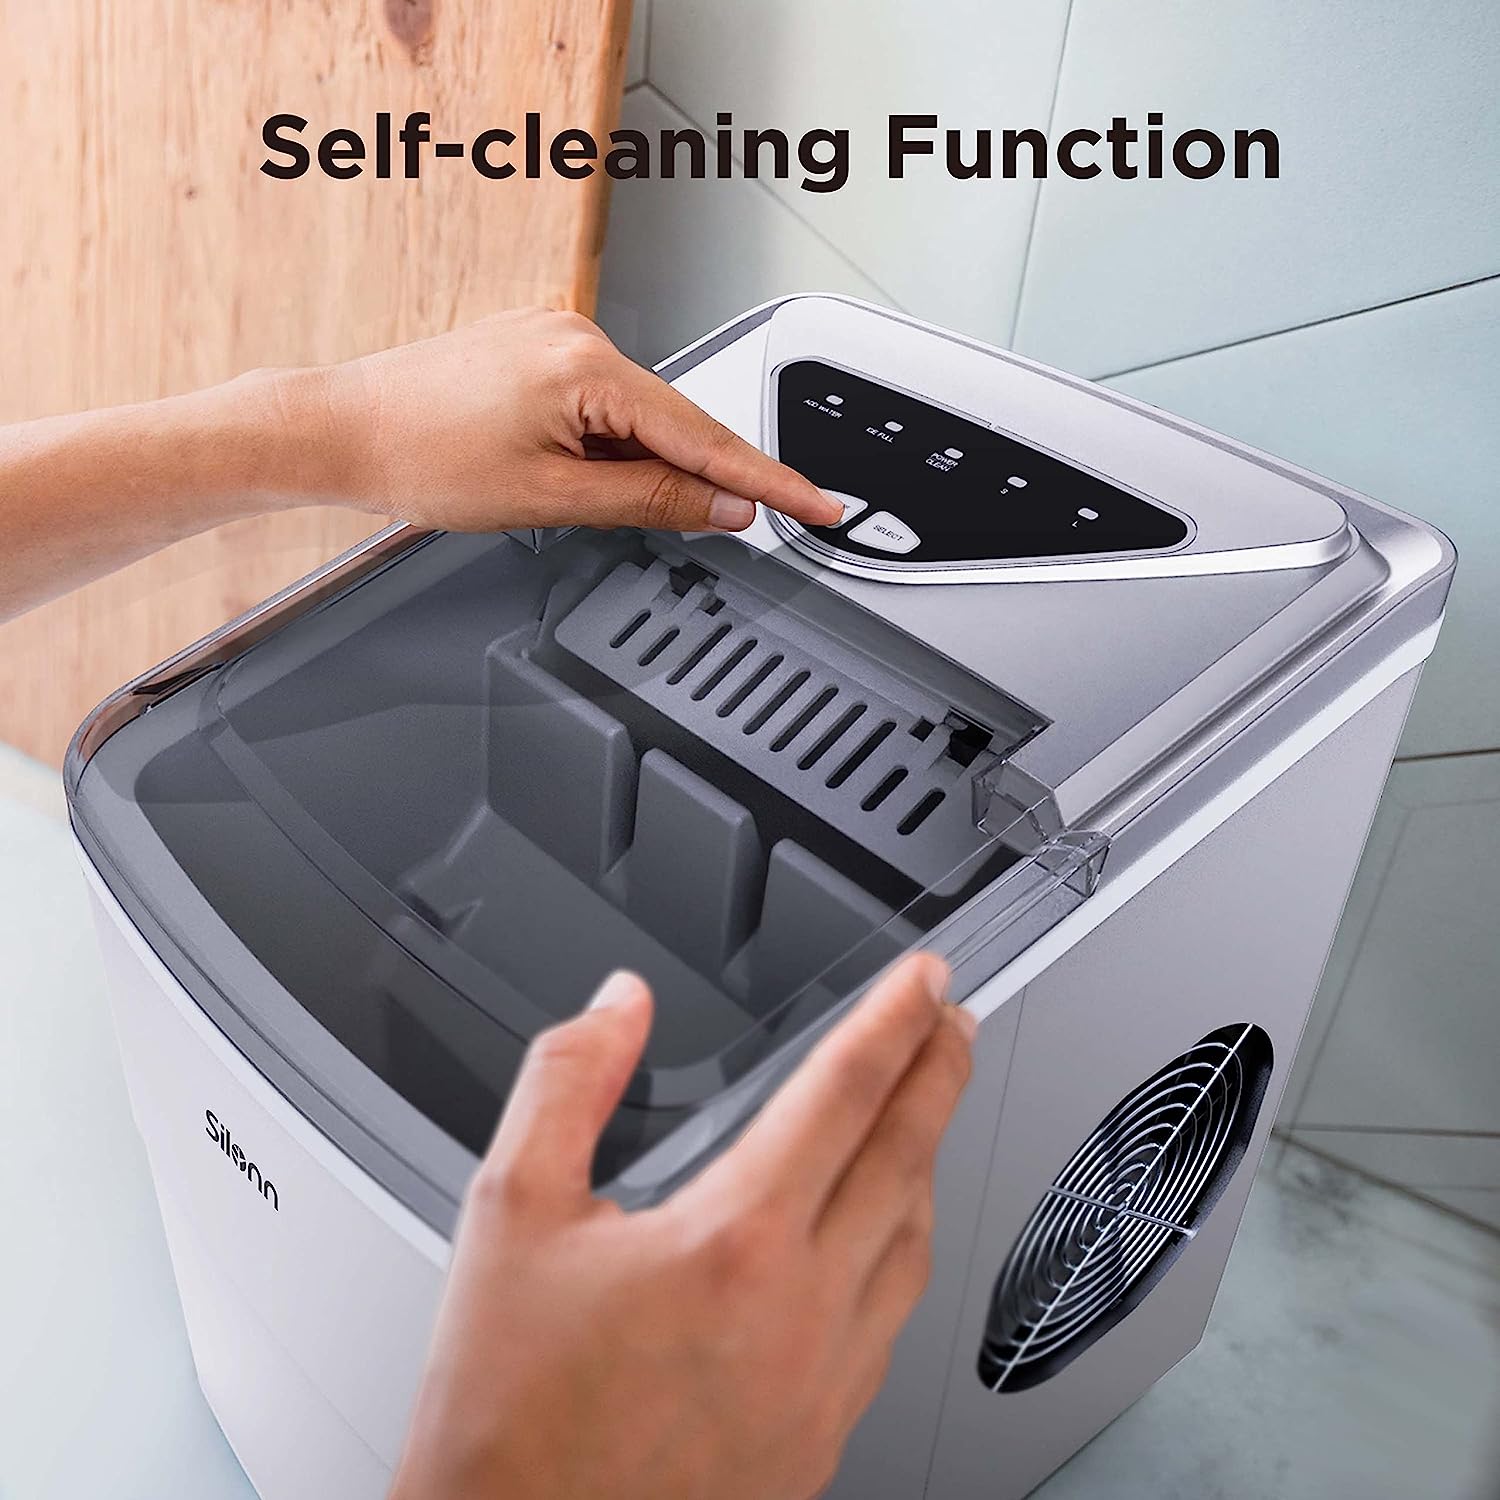 Silonn Countertop Ice Maker - Self-Cleaning Ice Machine with Ice